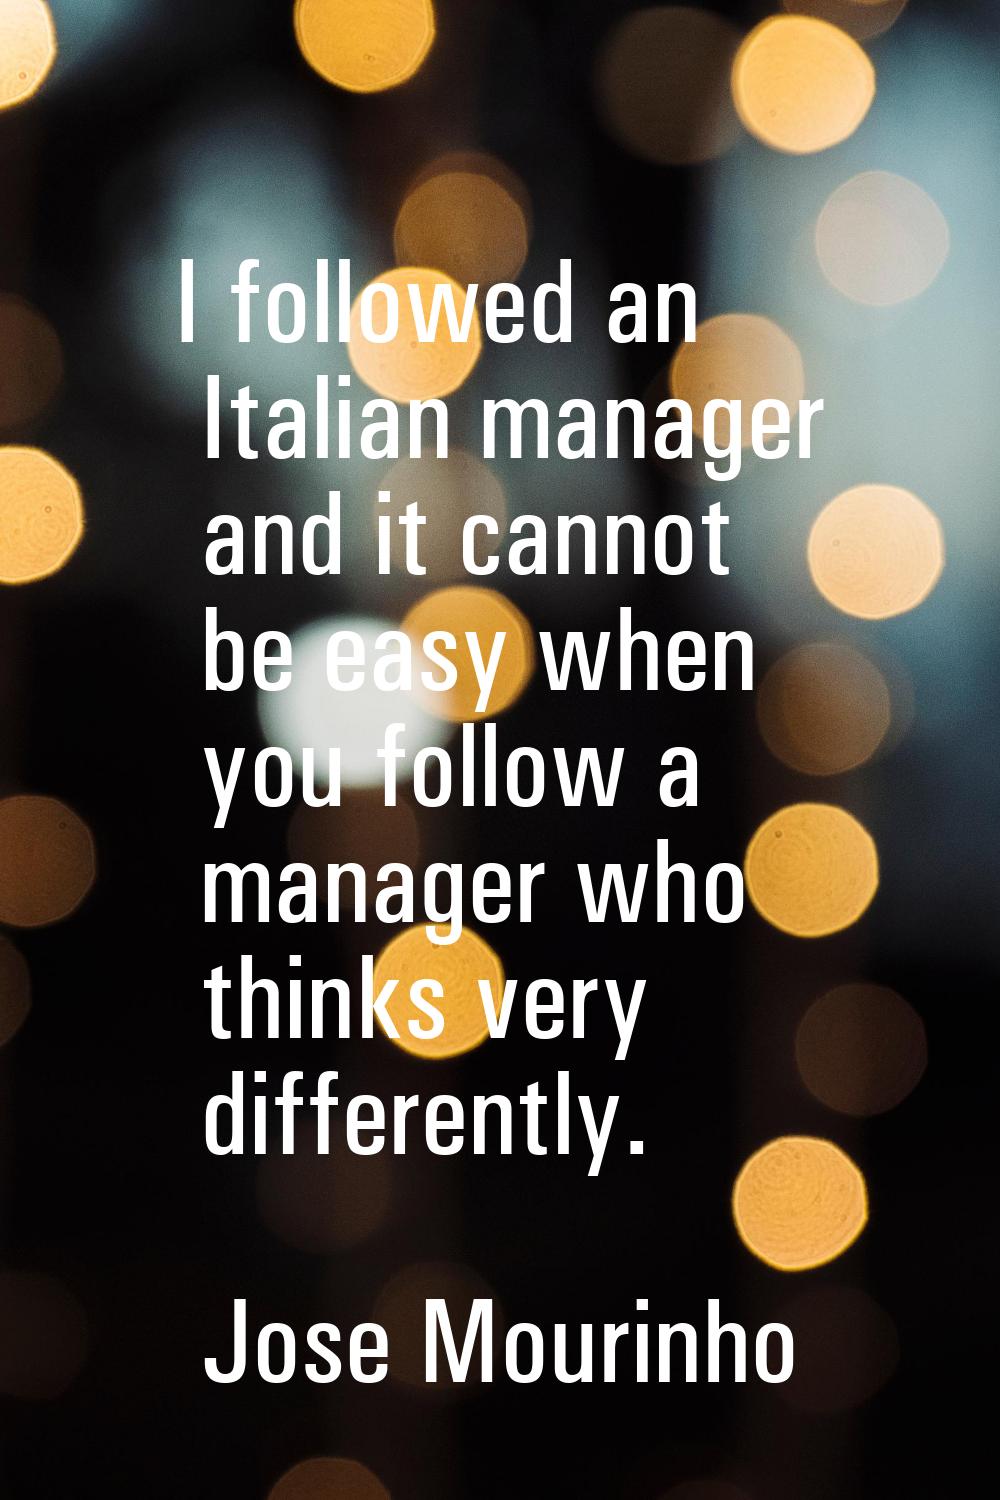 I followed an Italian manager and it cannot be easy when you follow a manager who thinks very diffe